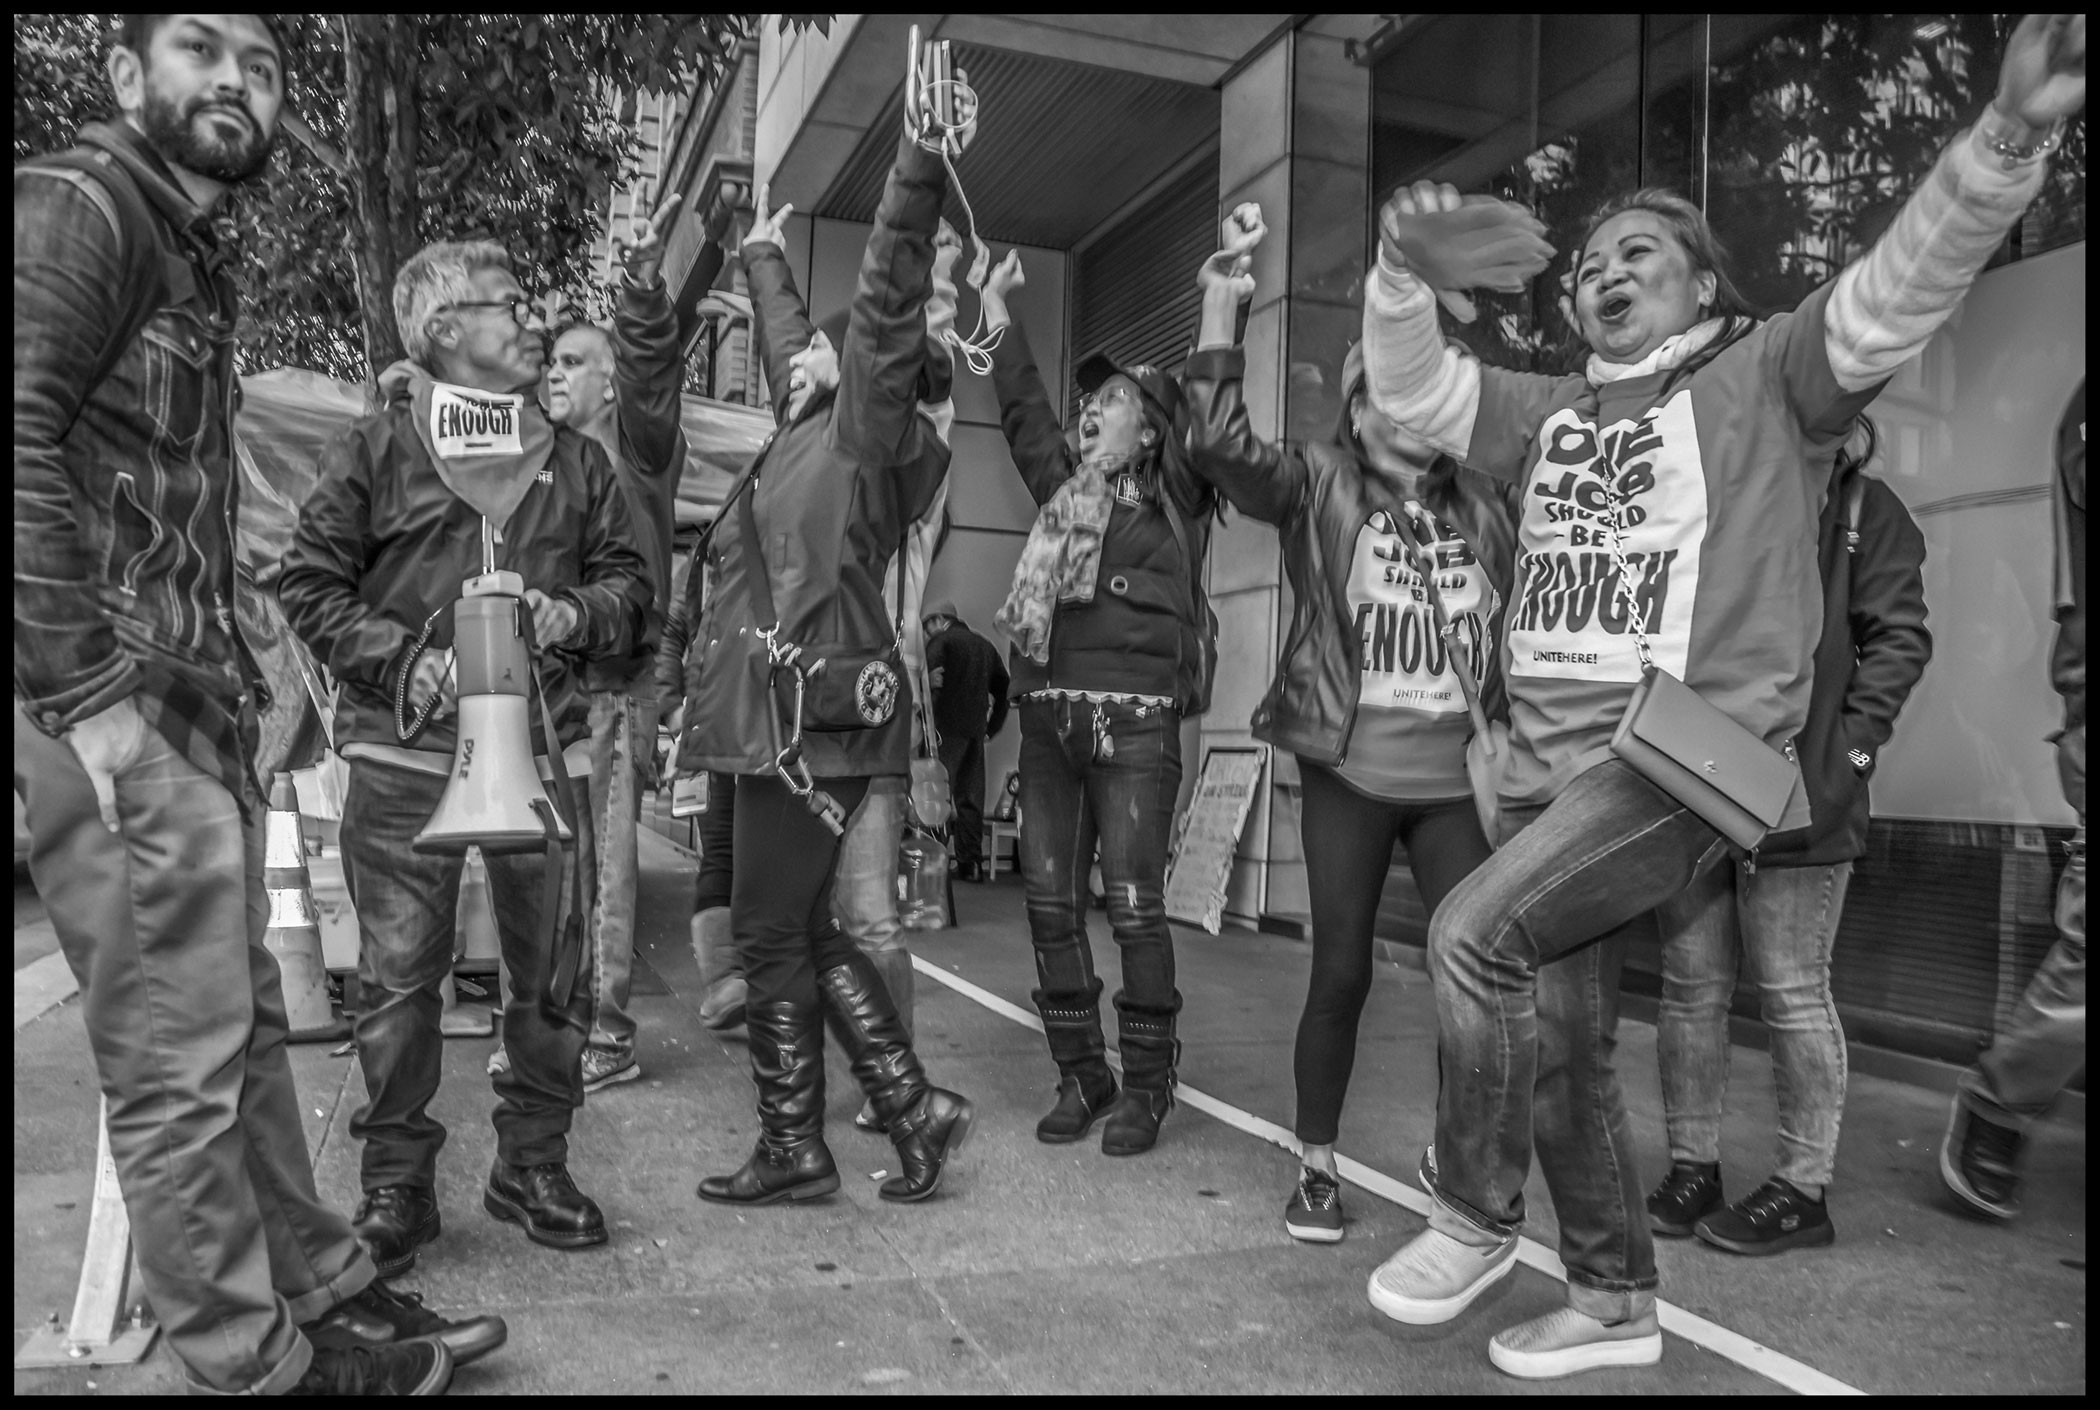 In front of the St. Regis Hotel, striker Camucha King and other Local 2 members celebrate the end of the strike.